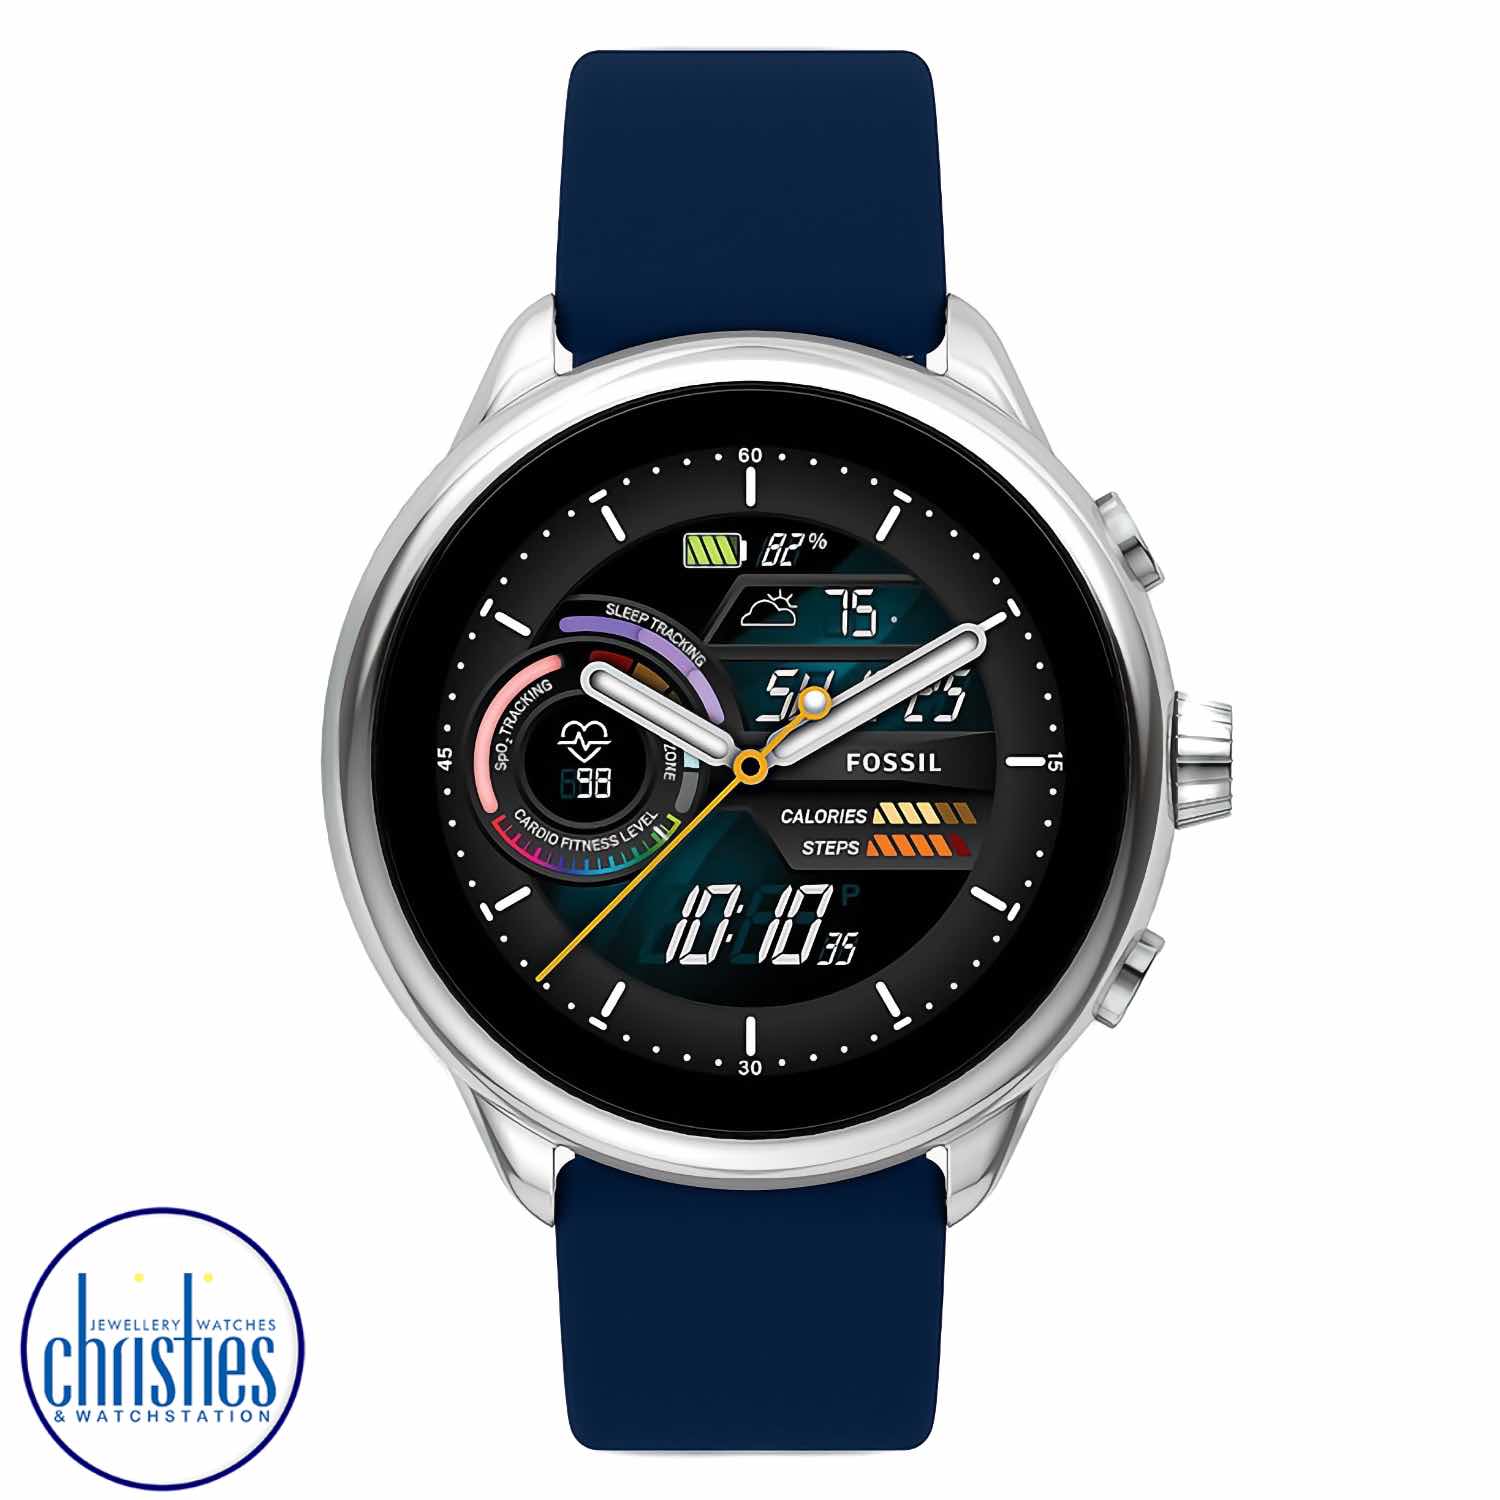 FTW4070 Fossil Gen 6 Wellness Edition Smartwatch Navy Silicone. ES5220 Fossil Raquel Three-Hand Date Gold-Tone Stainless Steel Watch Afterpay - Split your purchase into 4 instalments - Pay for your purchase over 4 instalments, due every two weeks. fossil 